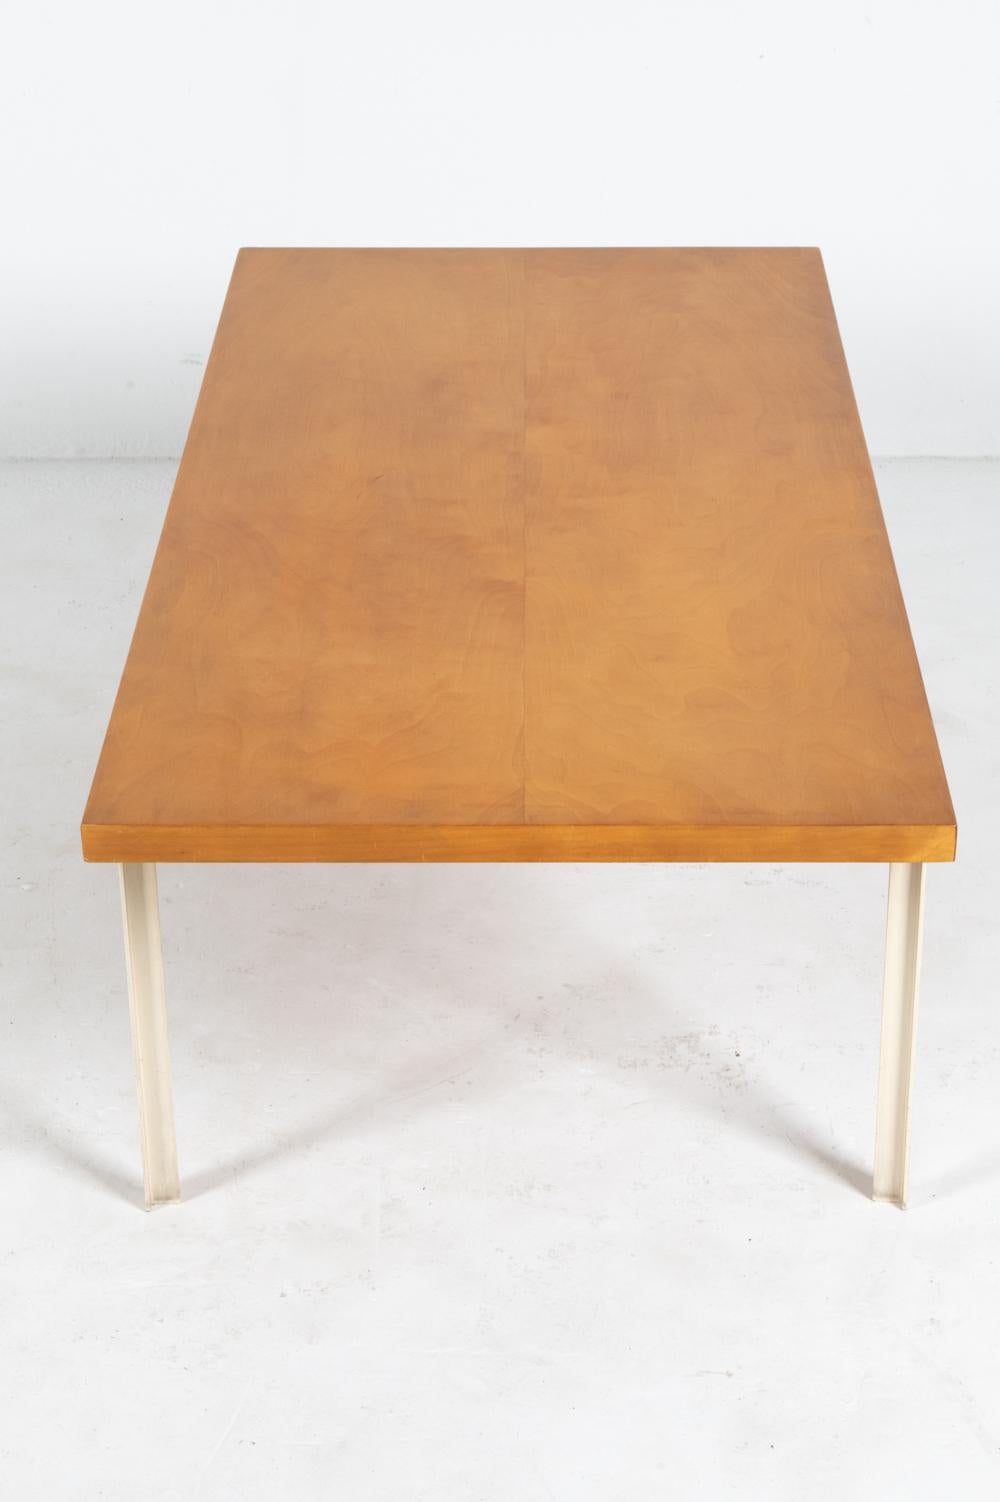 Rare Florence Knoll T-Angle Coffee Table in Birch; Knoll International c. 1960's For Sale 7